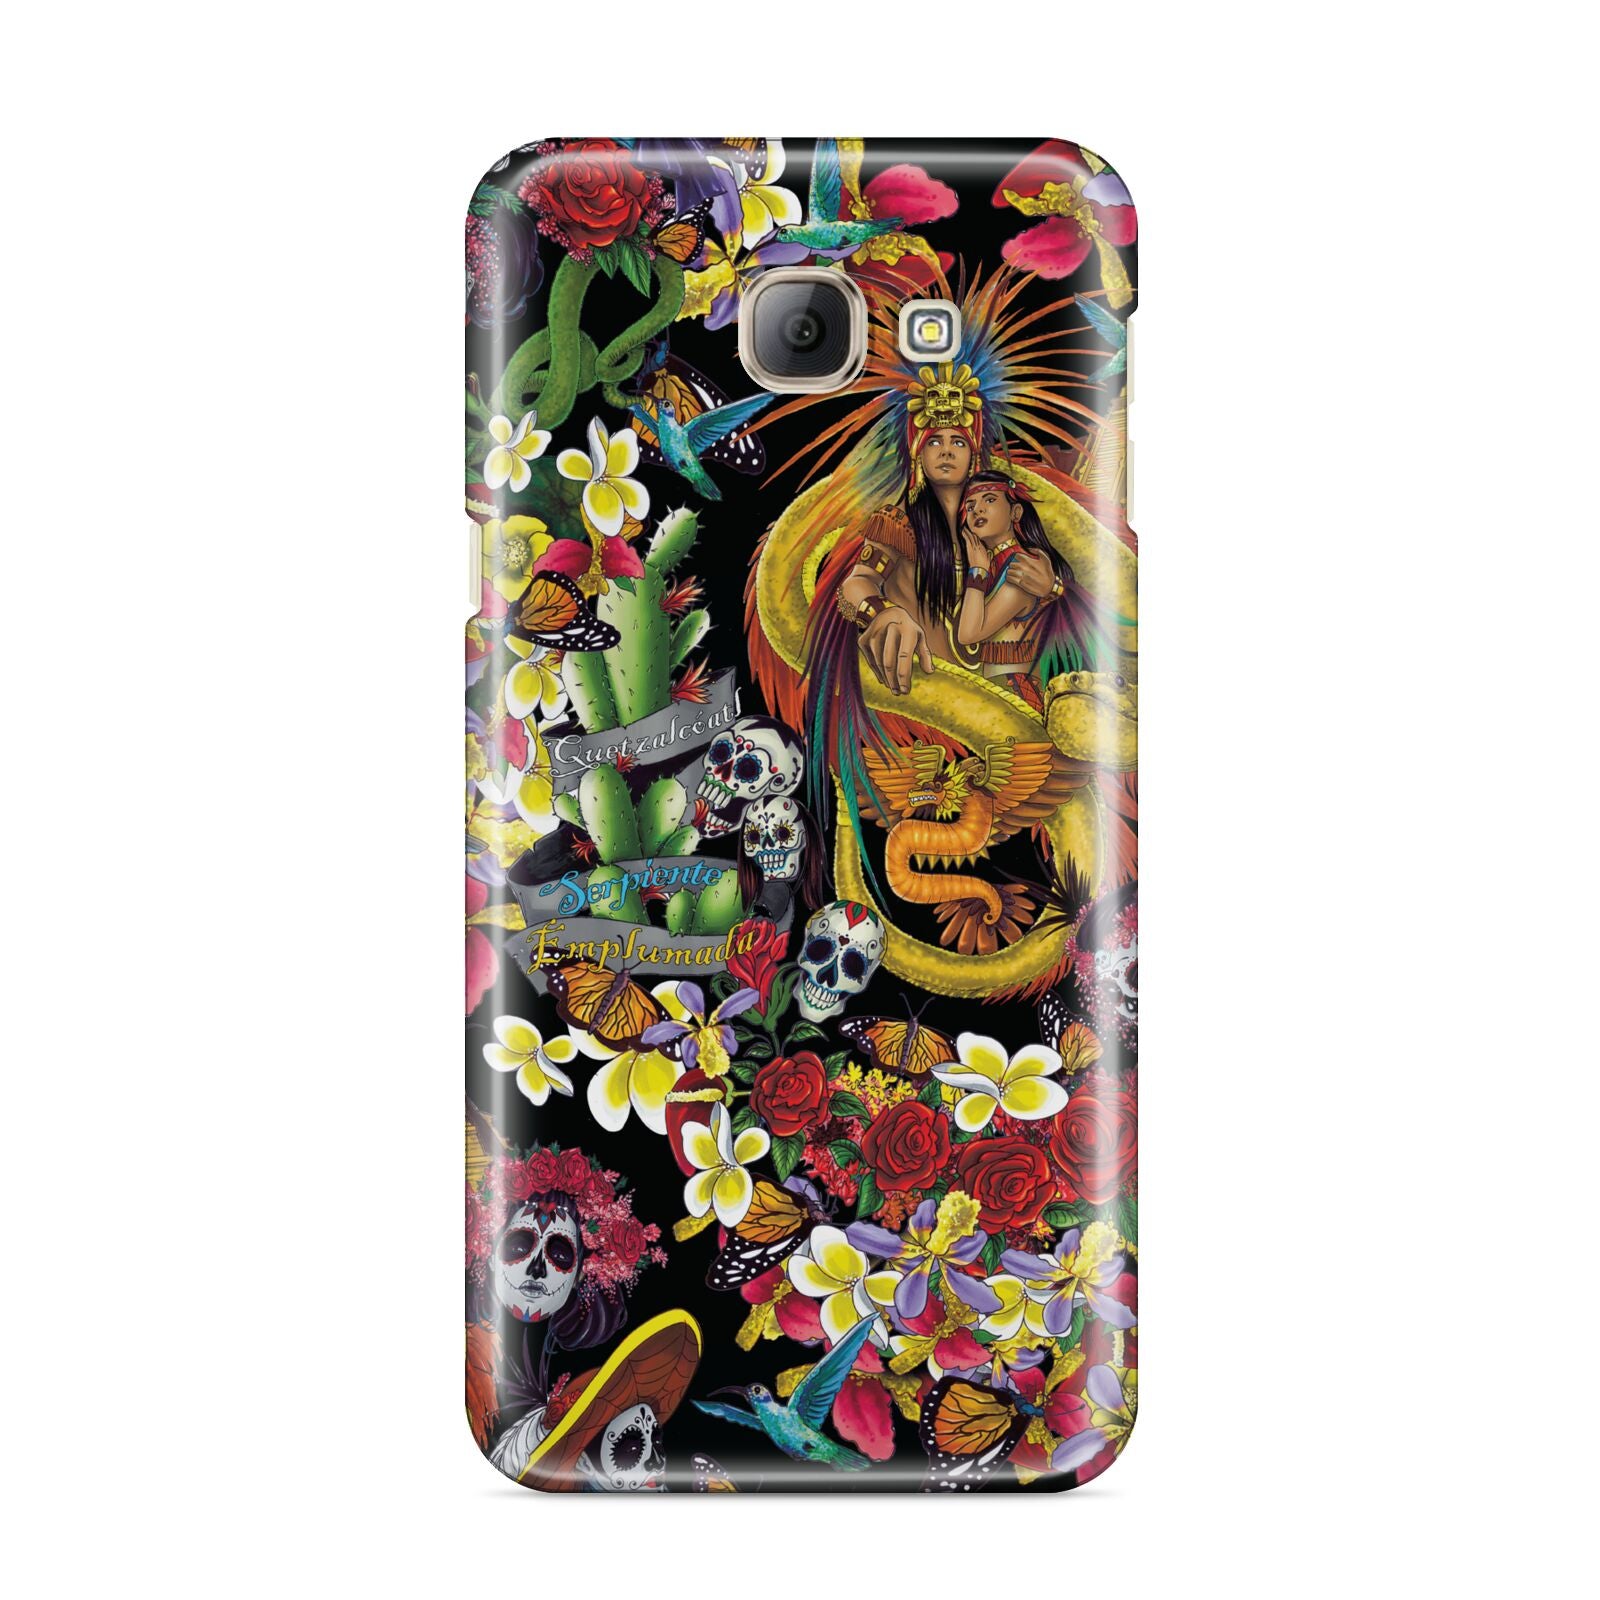 Day of the Dead Samsung Galaxy A8 2016 Case